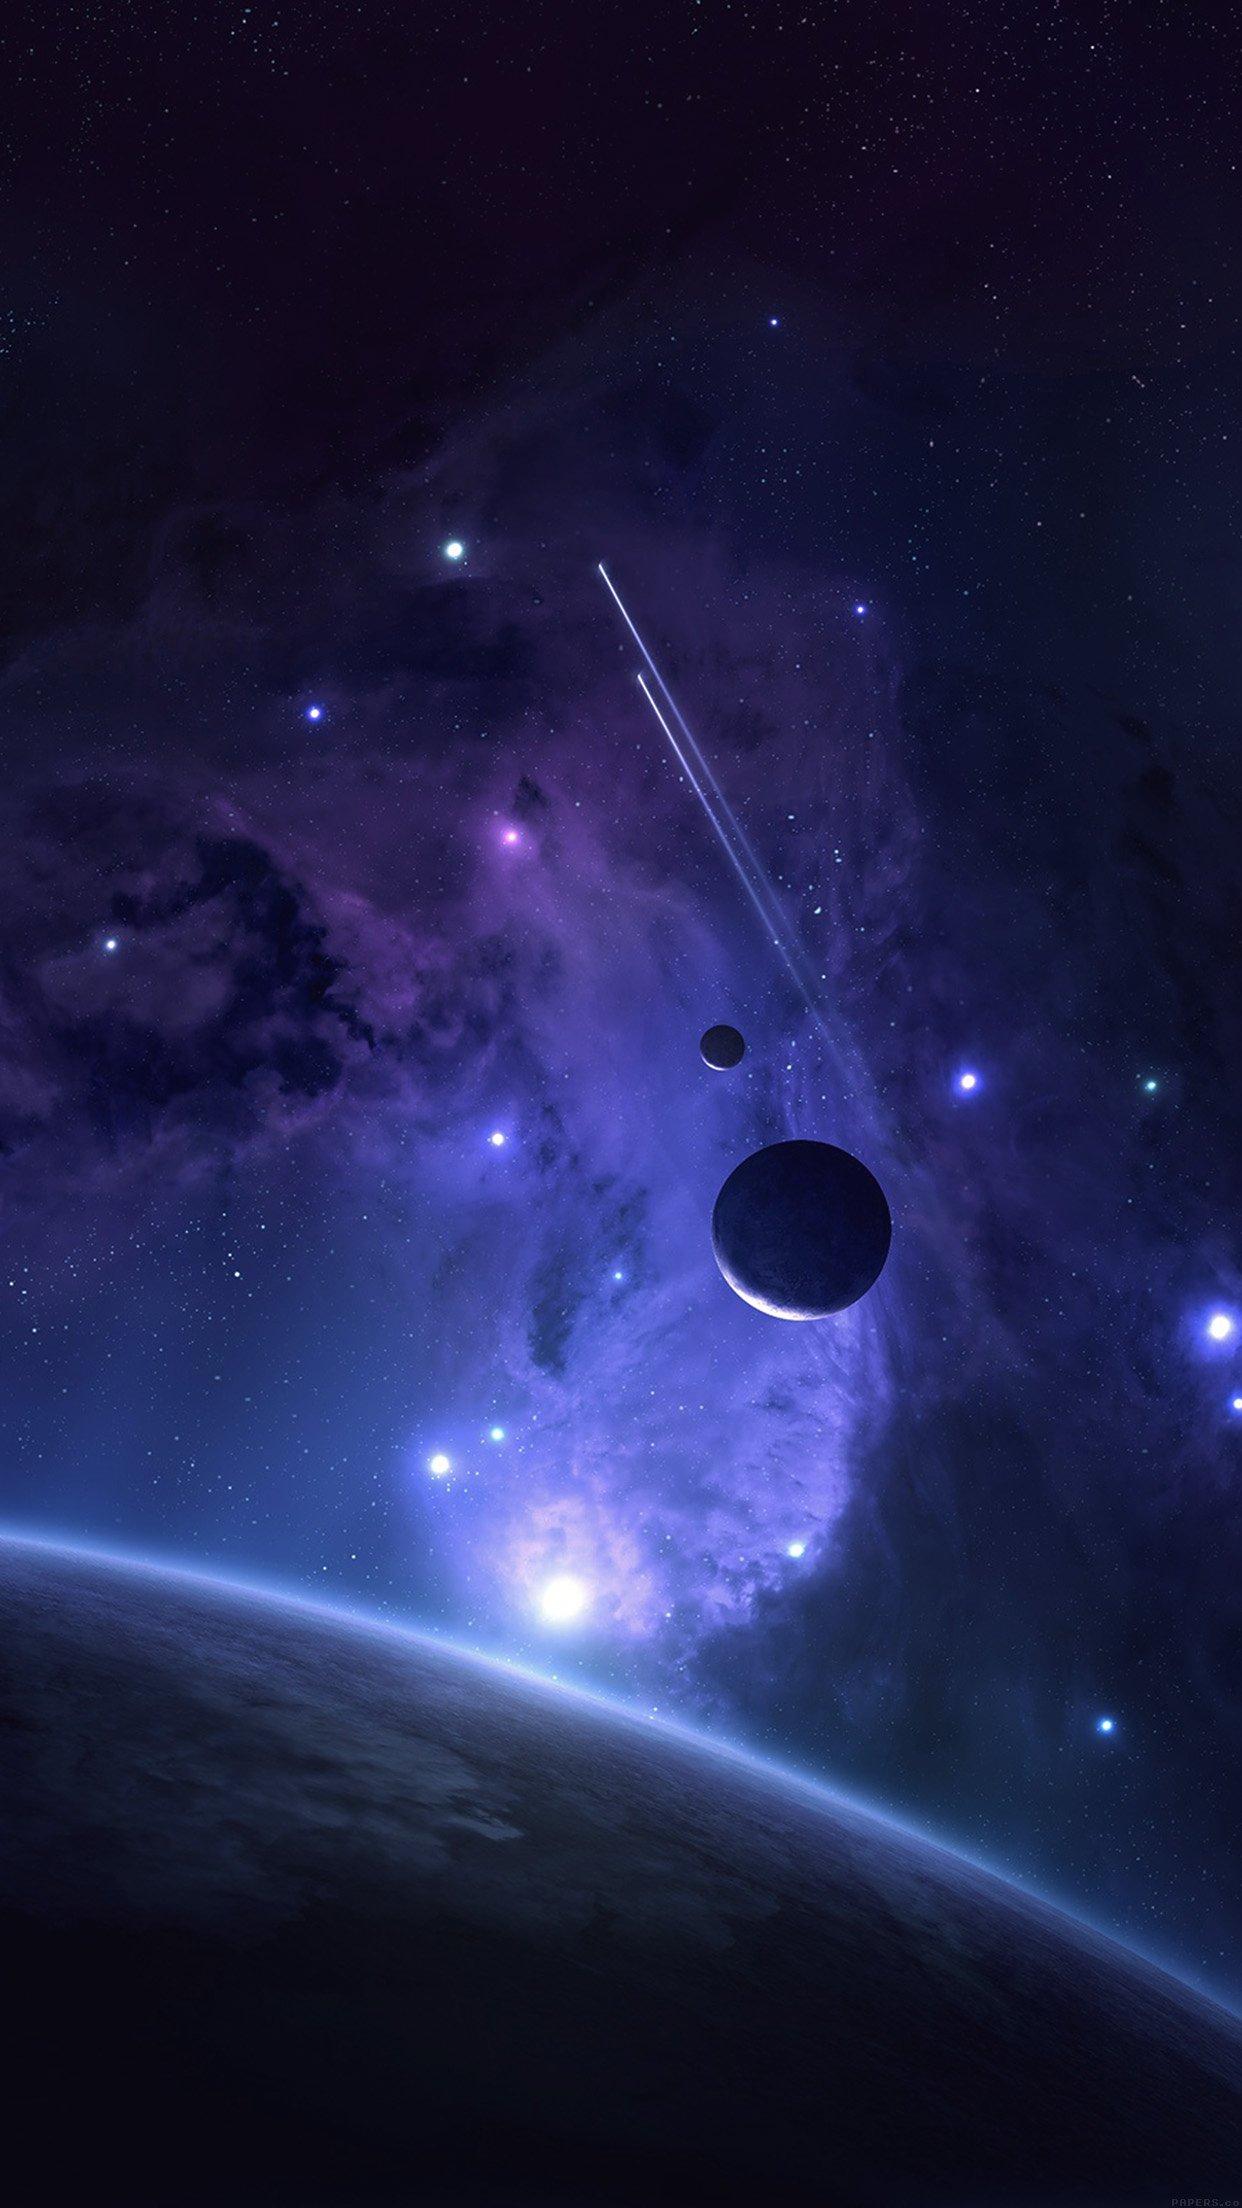 iPhone wallpaper. planets space